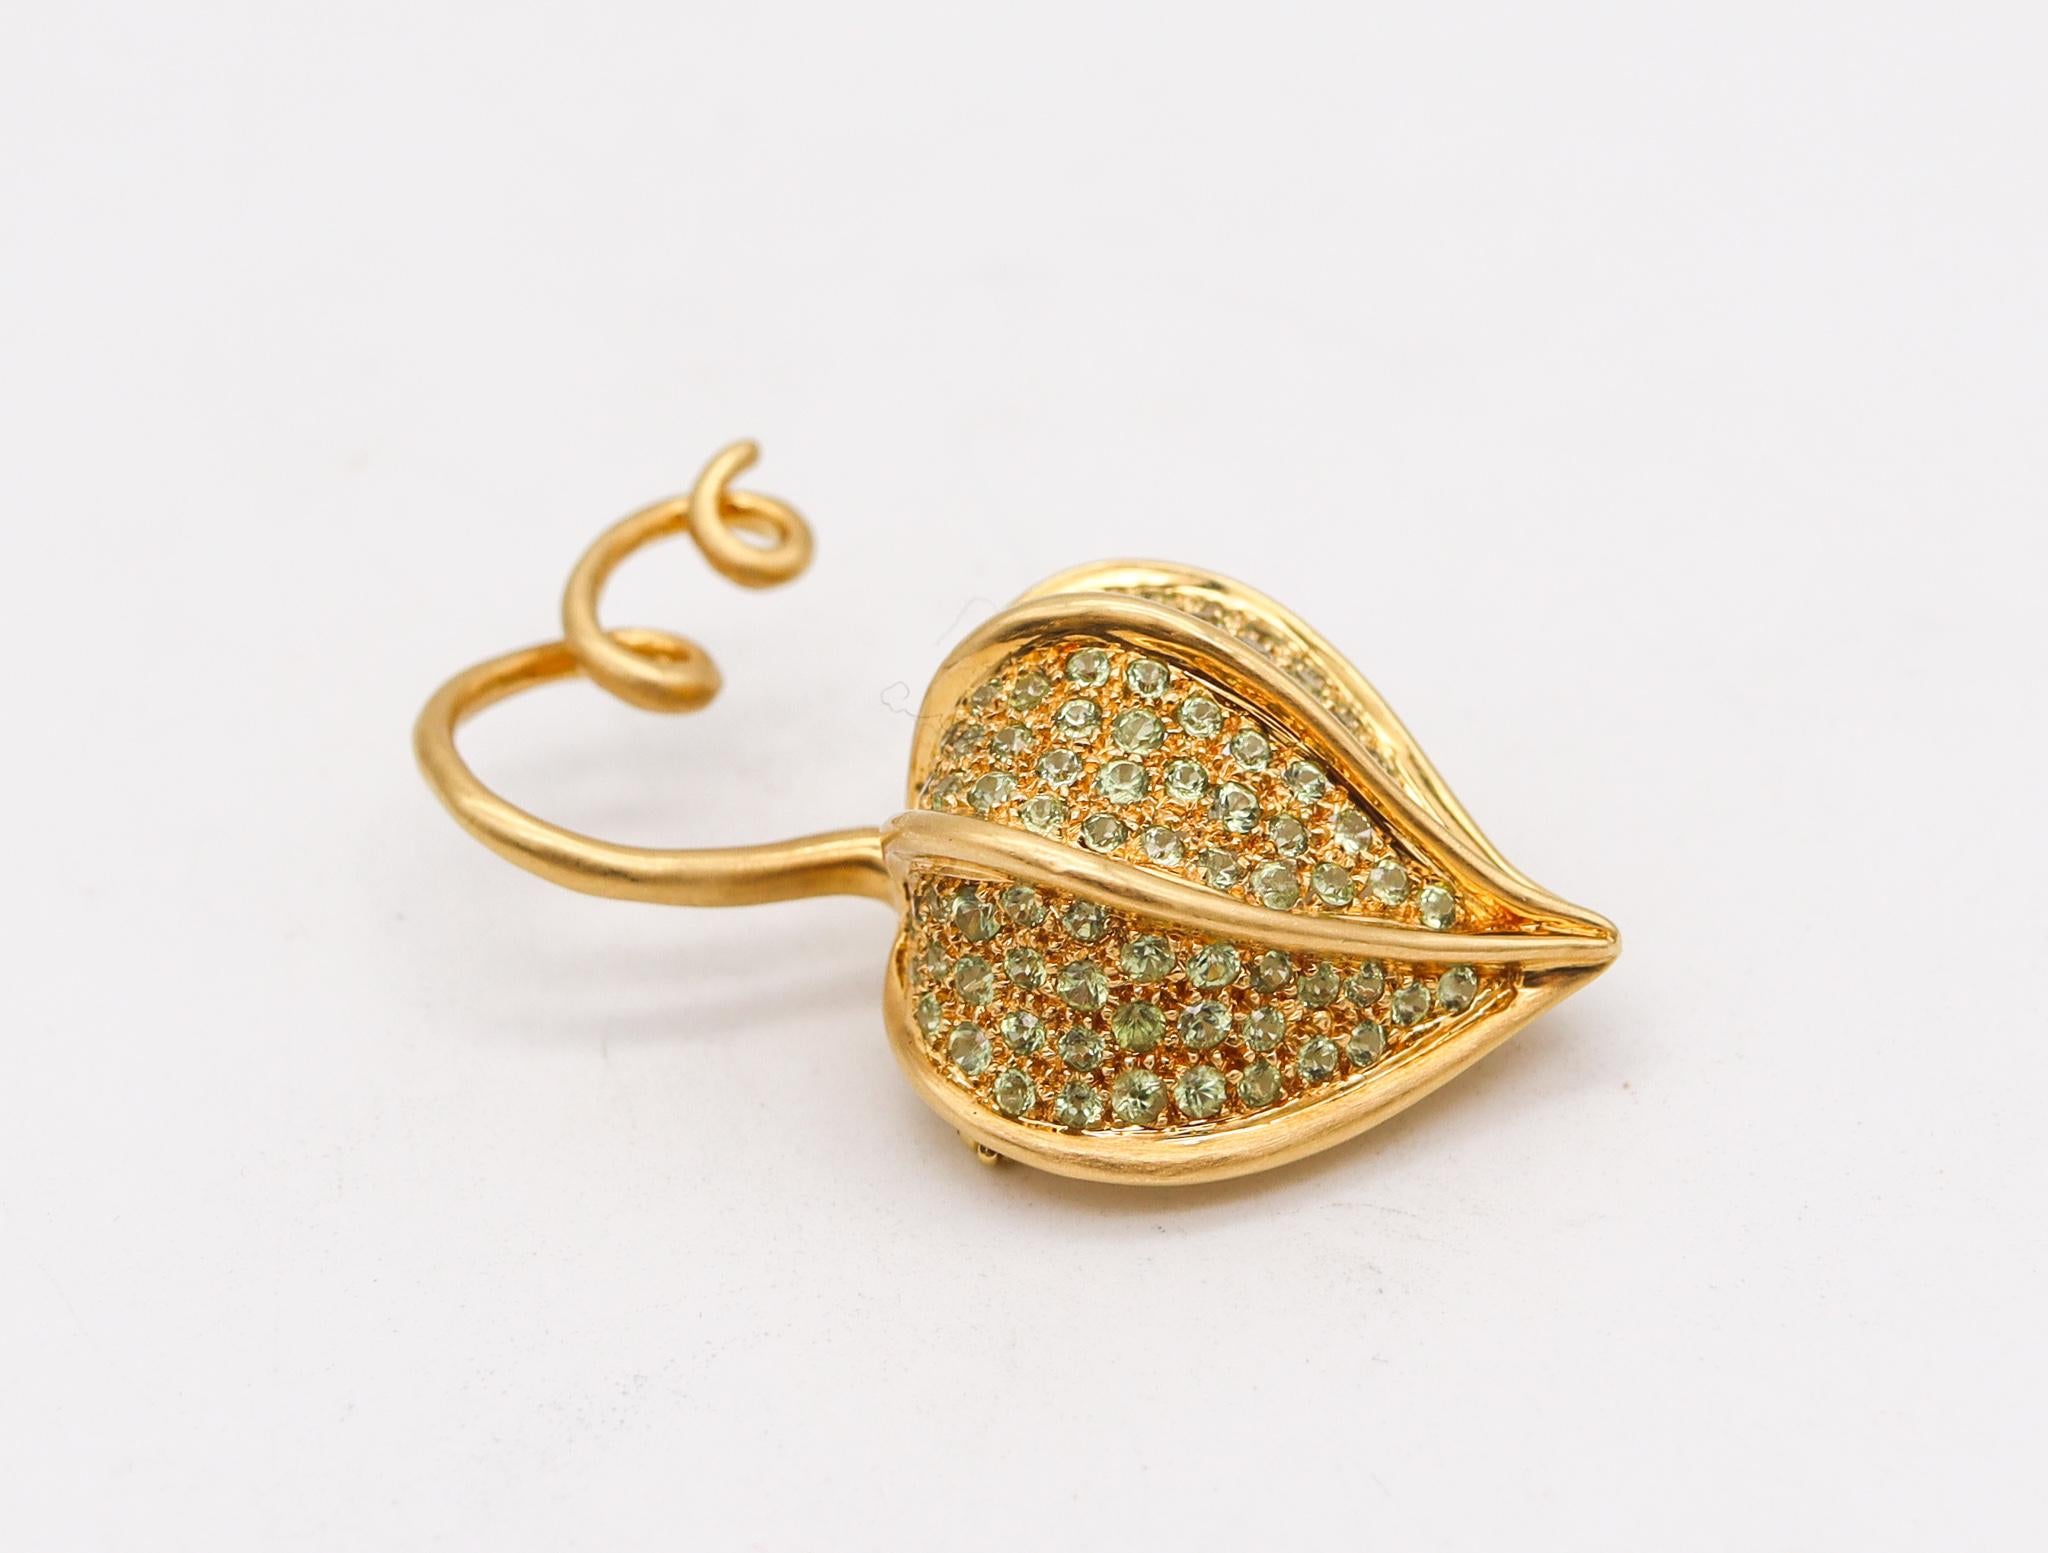 Modern Angela Cummings 1989 Brooch in 18kt Yellow Gold with 3.76 Ctw in Green Sapphires For Sale